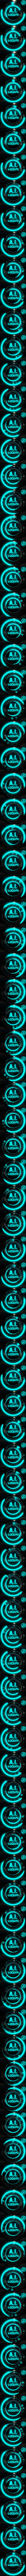 A.I. LOOPS collection image